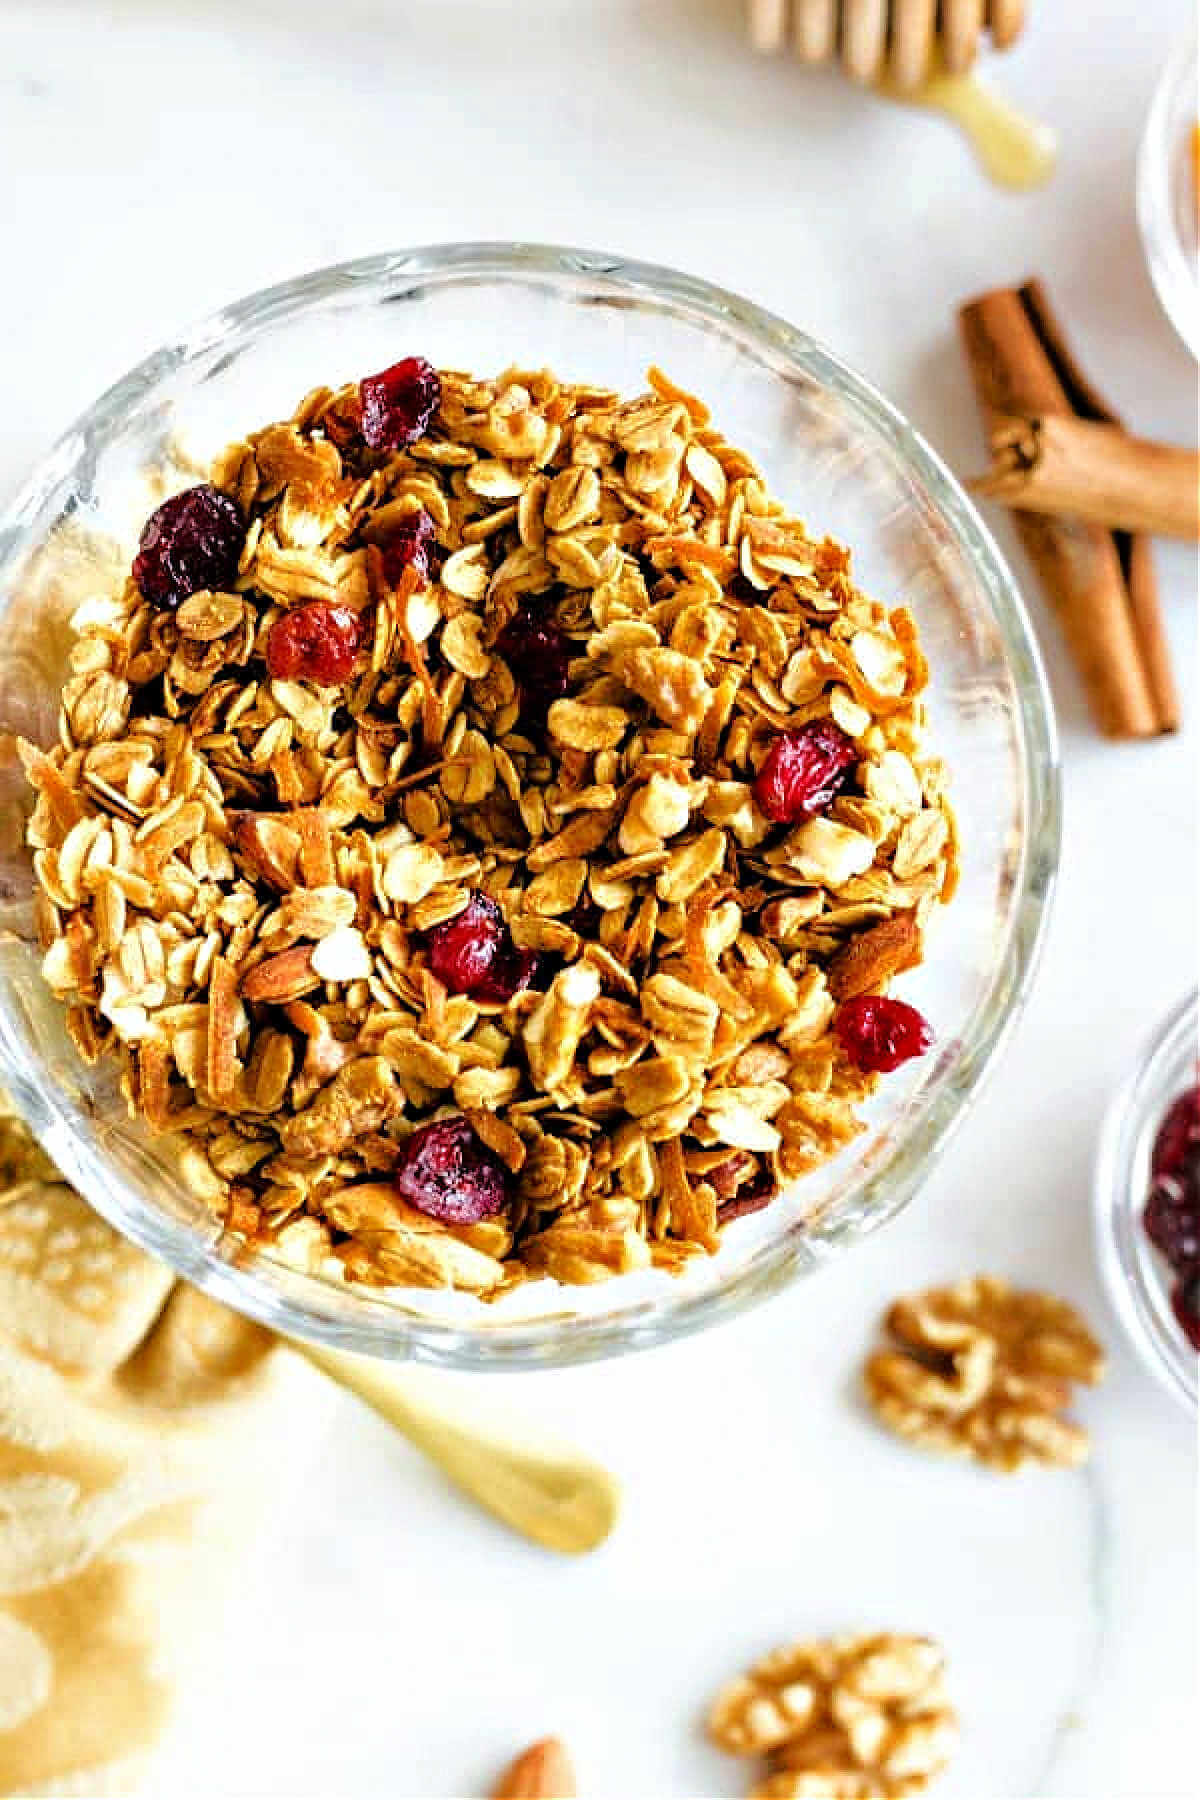 Nut granola in a bowl on a table with cinnamon sticks and walnuts scattered around.